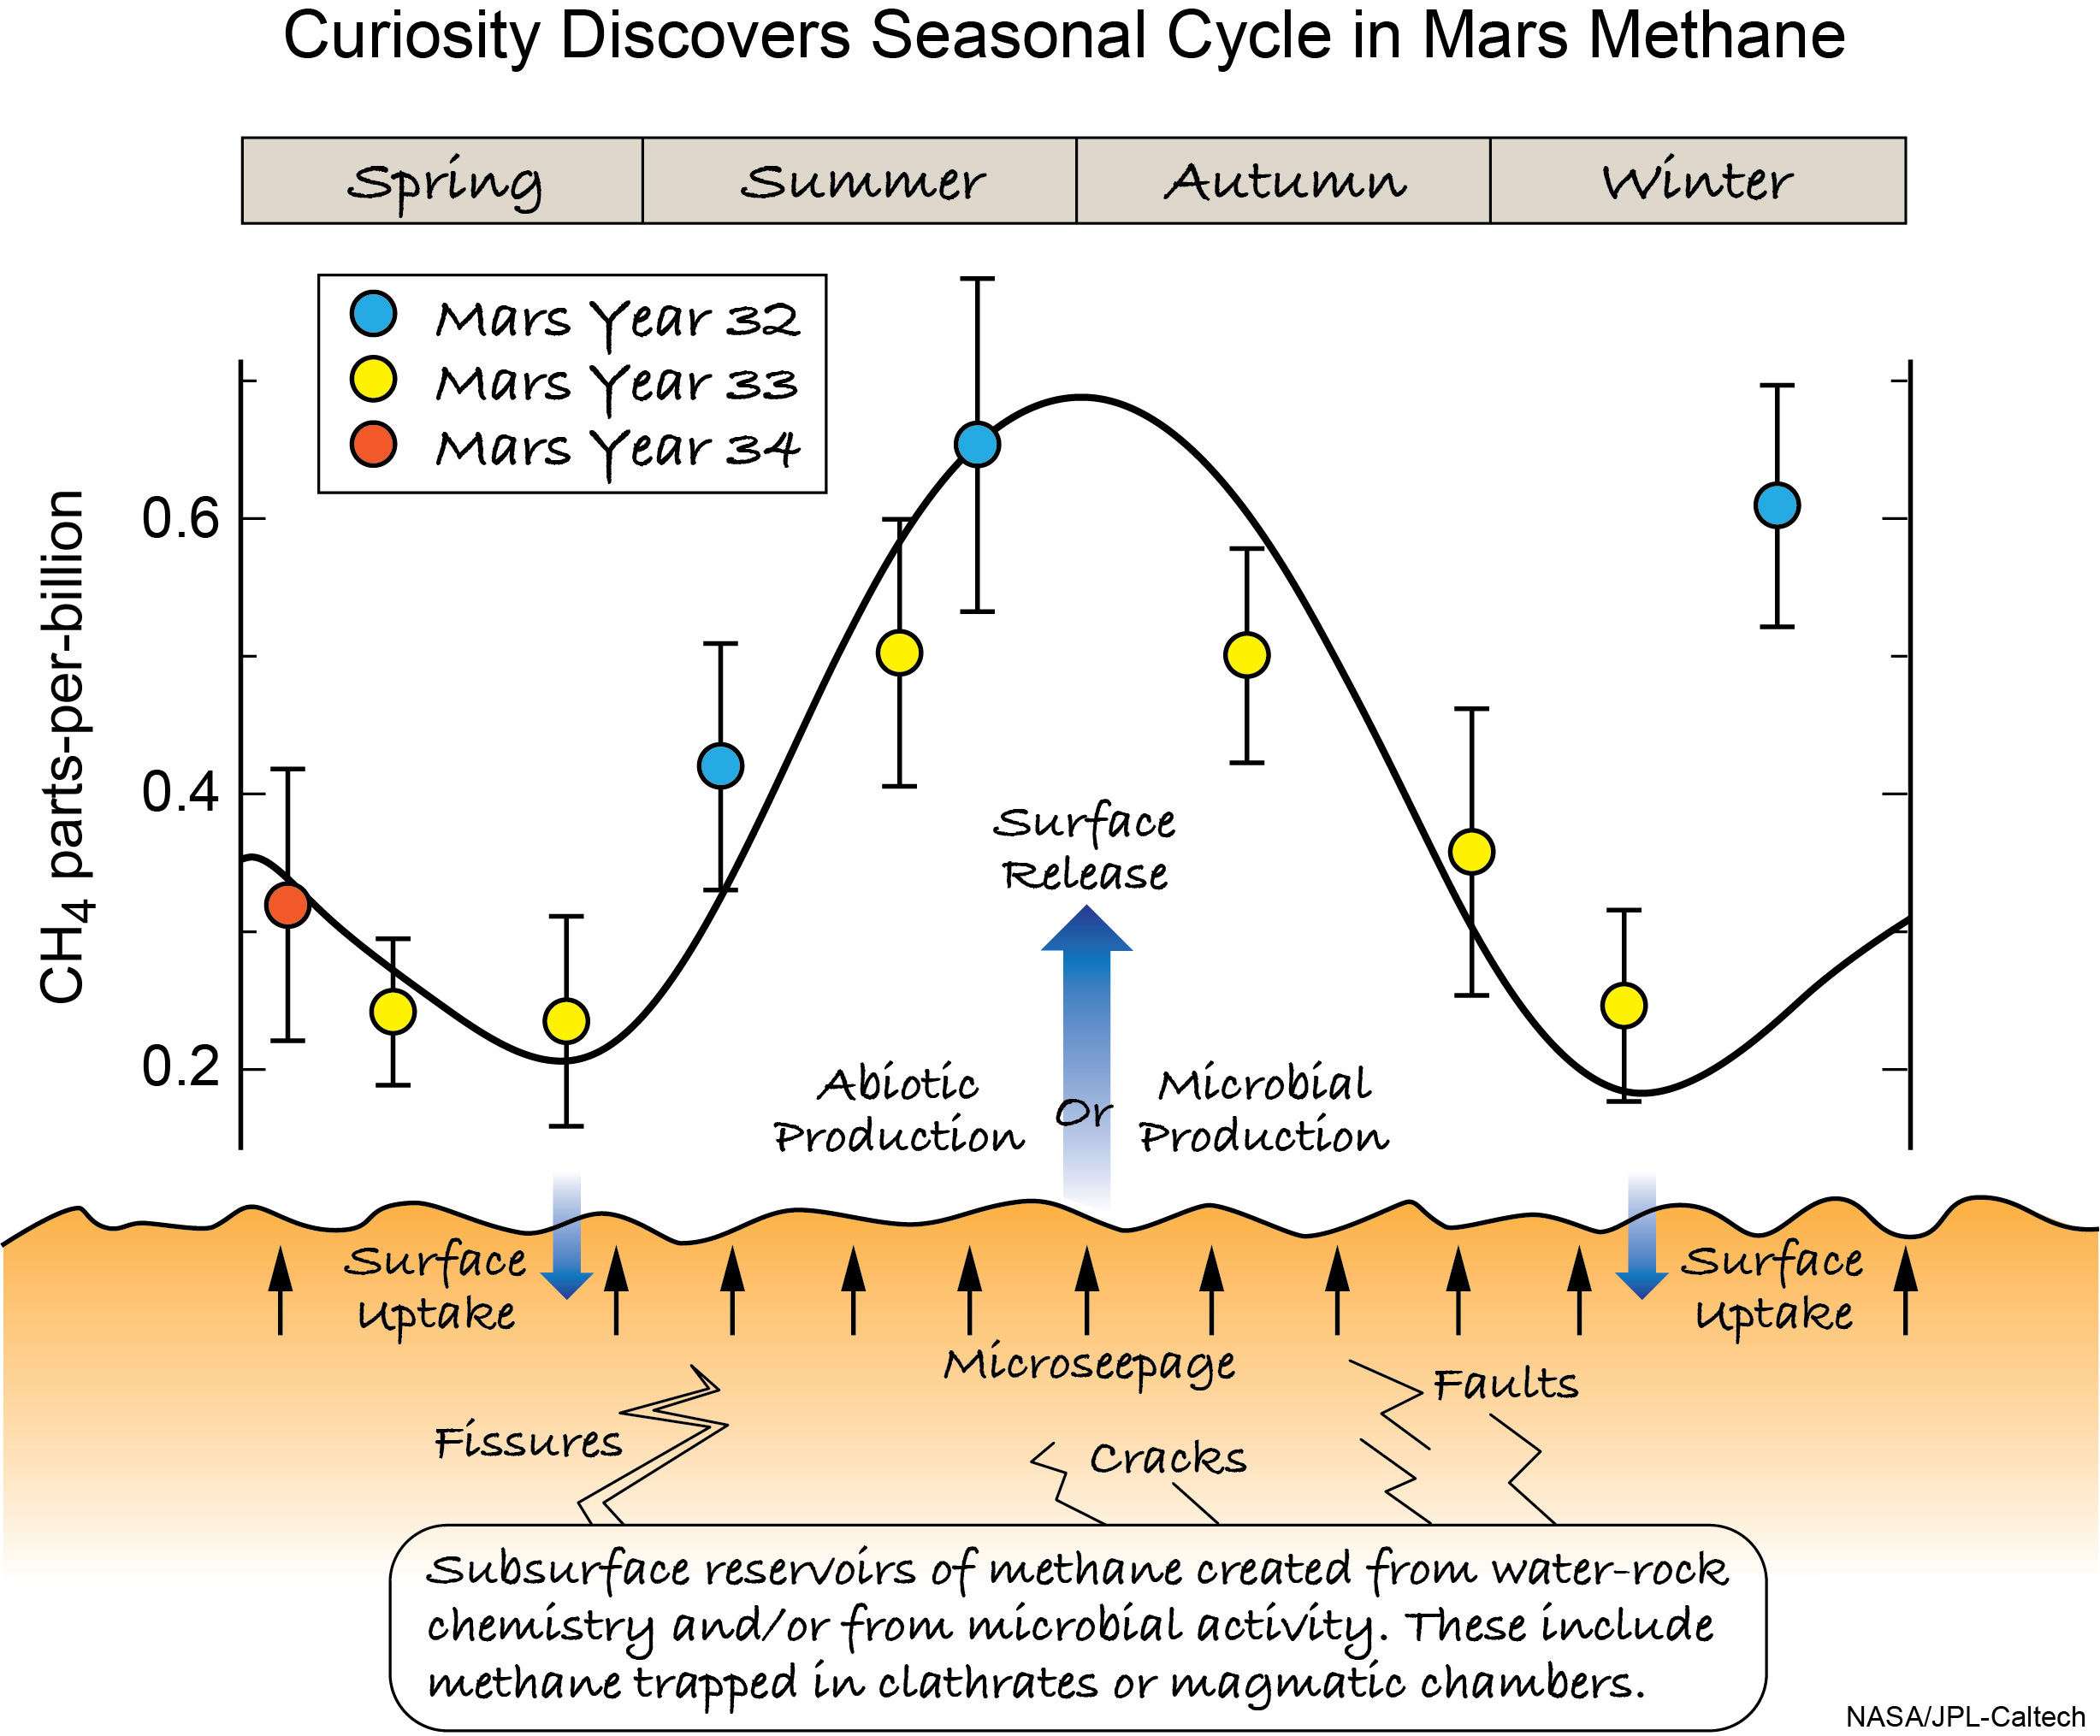 A graph showing changes in methane concentrations observed over time